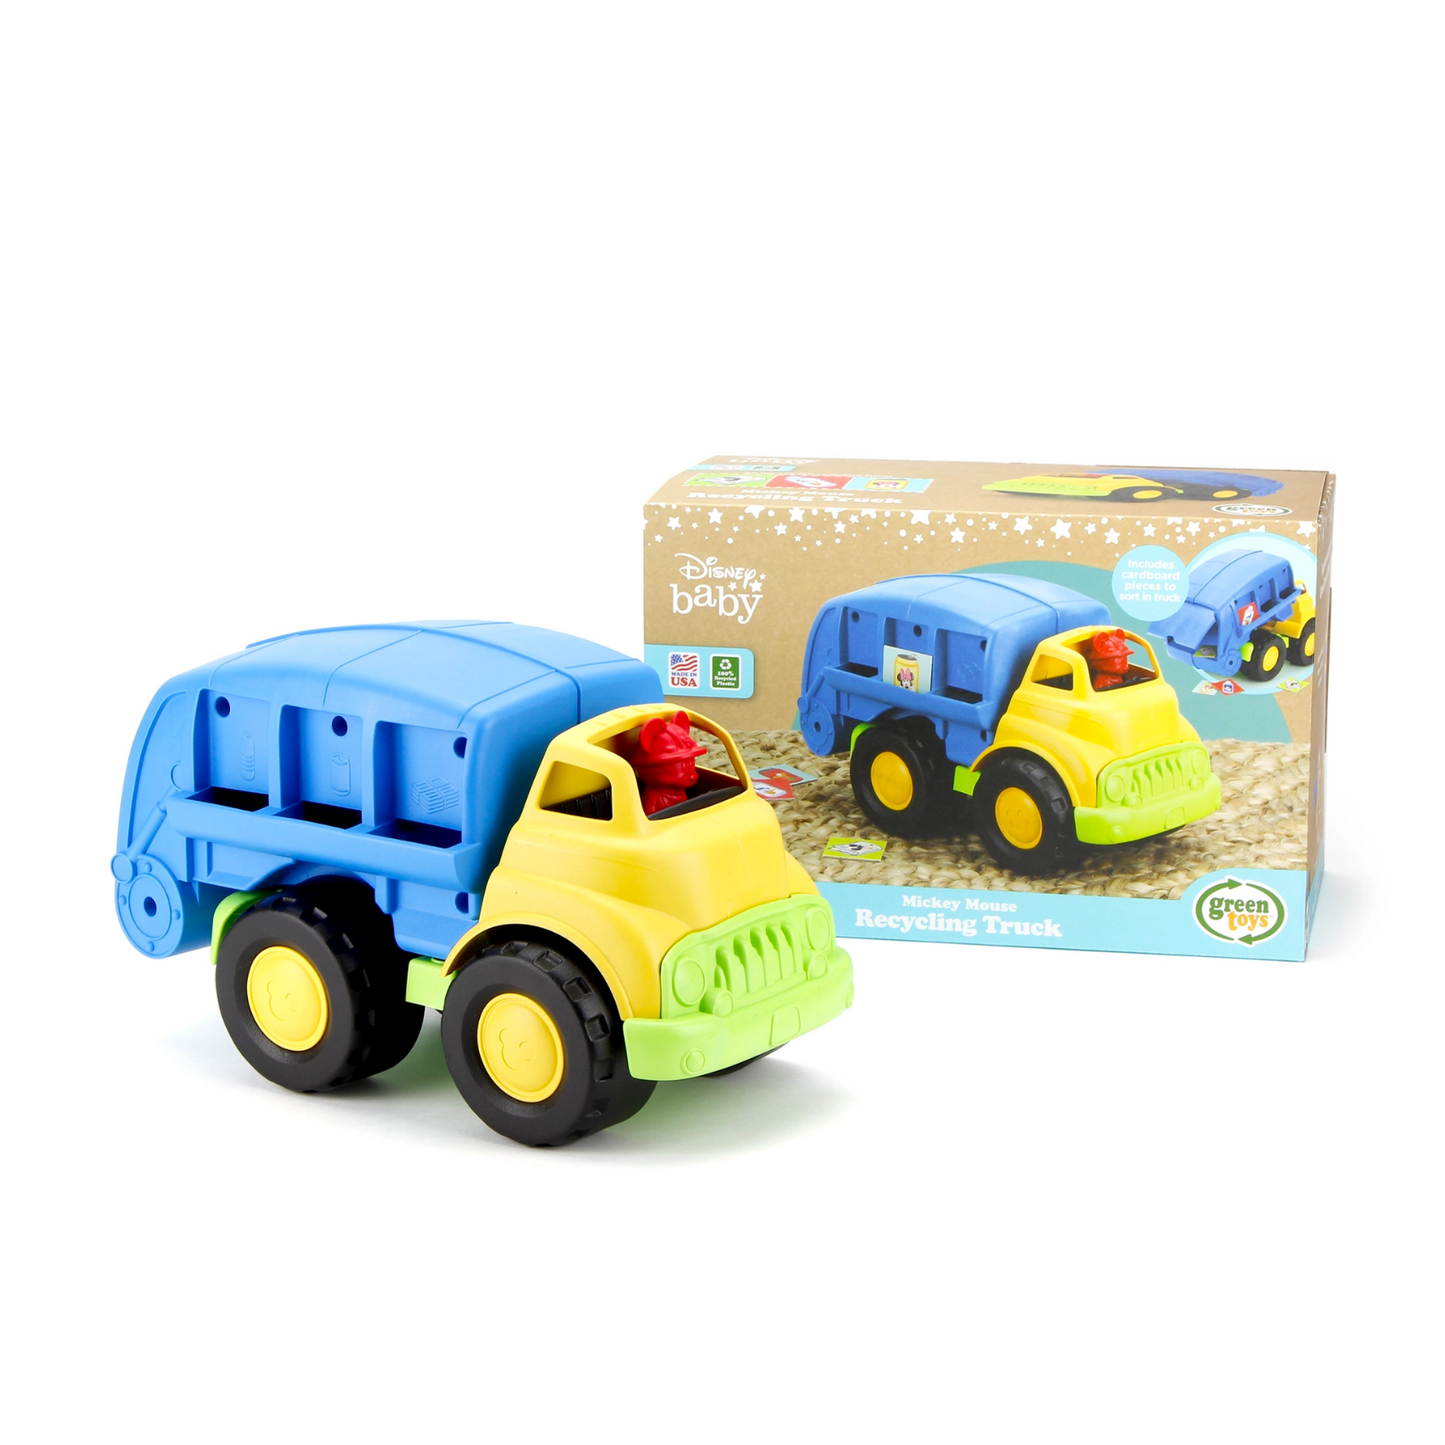 Disney Baby Mickey Mouse Recycling Truck